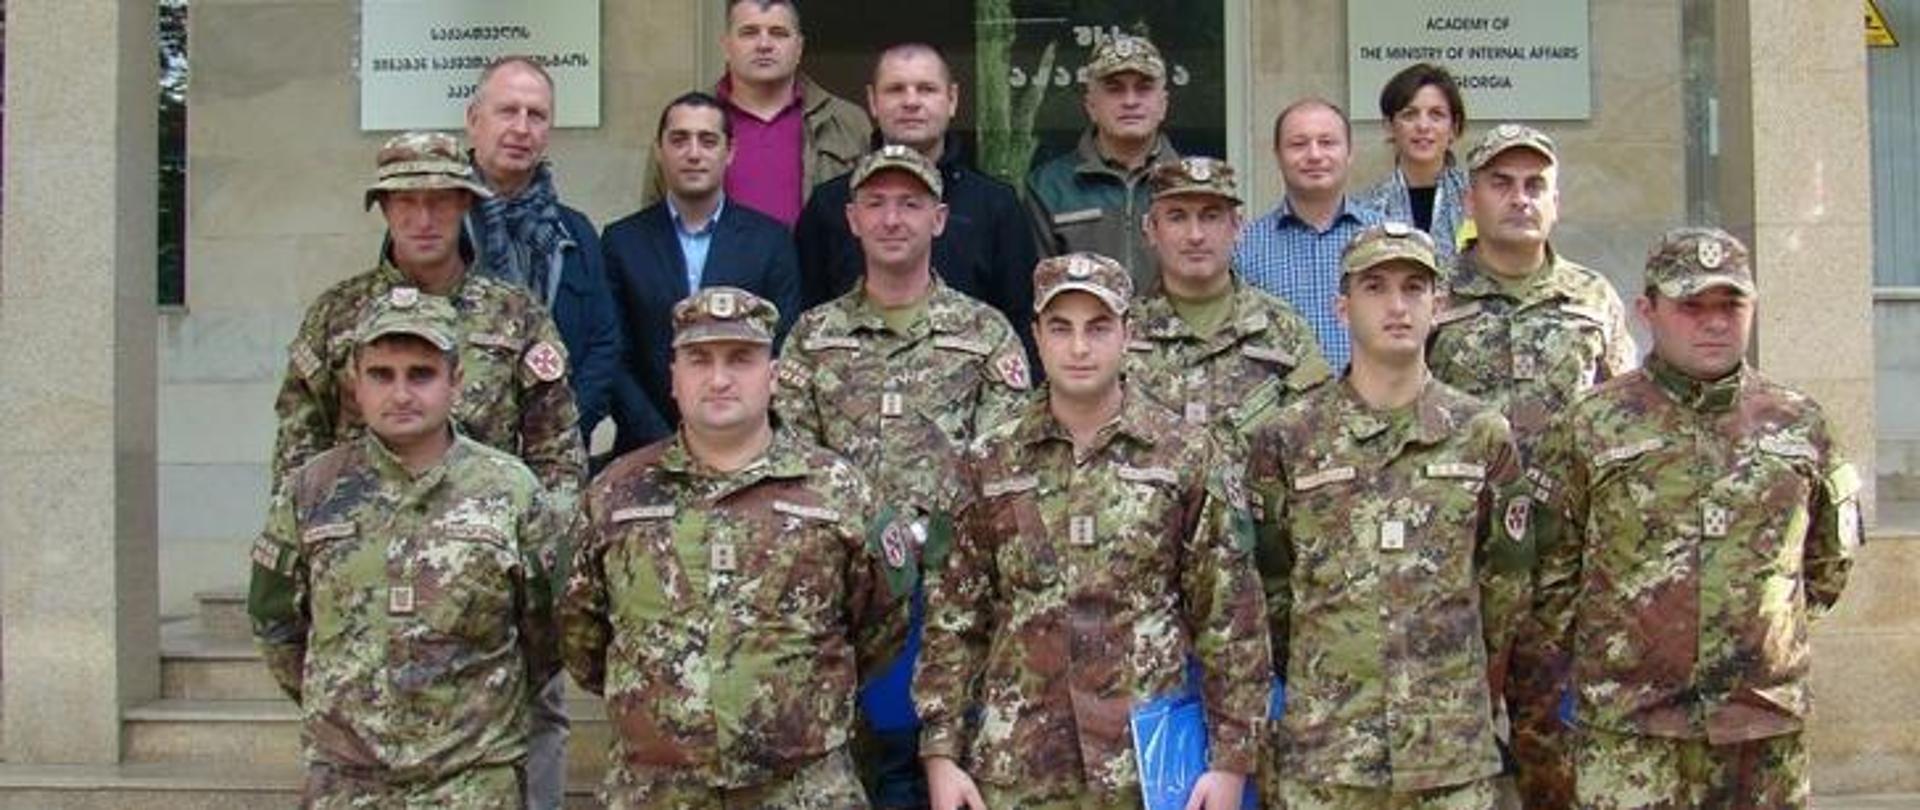 Training for capacity building and institutional strengthening of Georgia's Border Polic